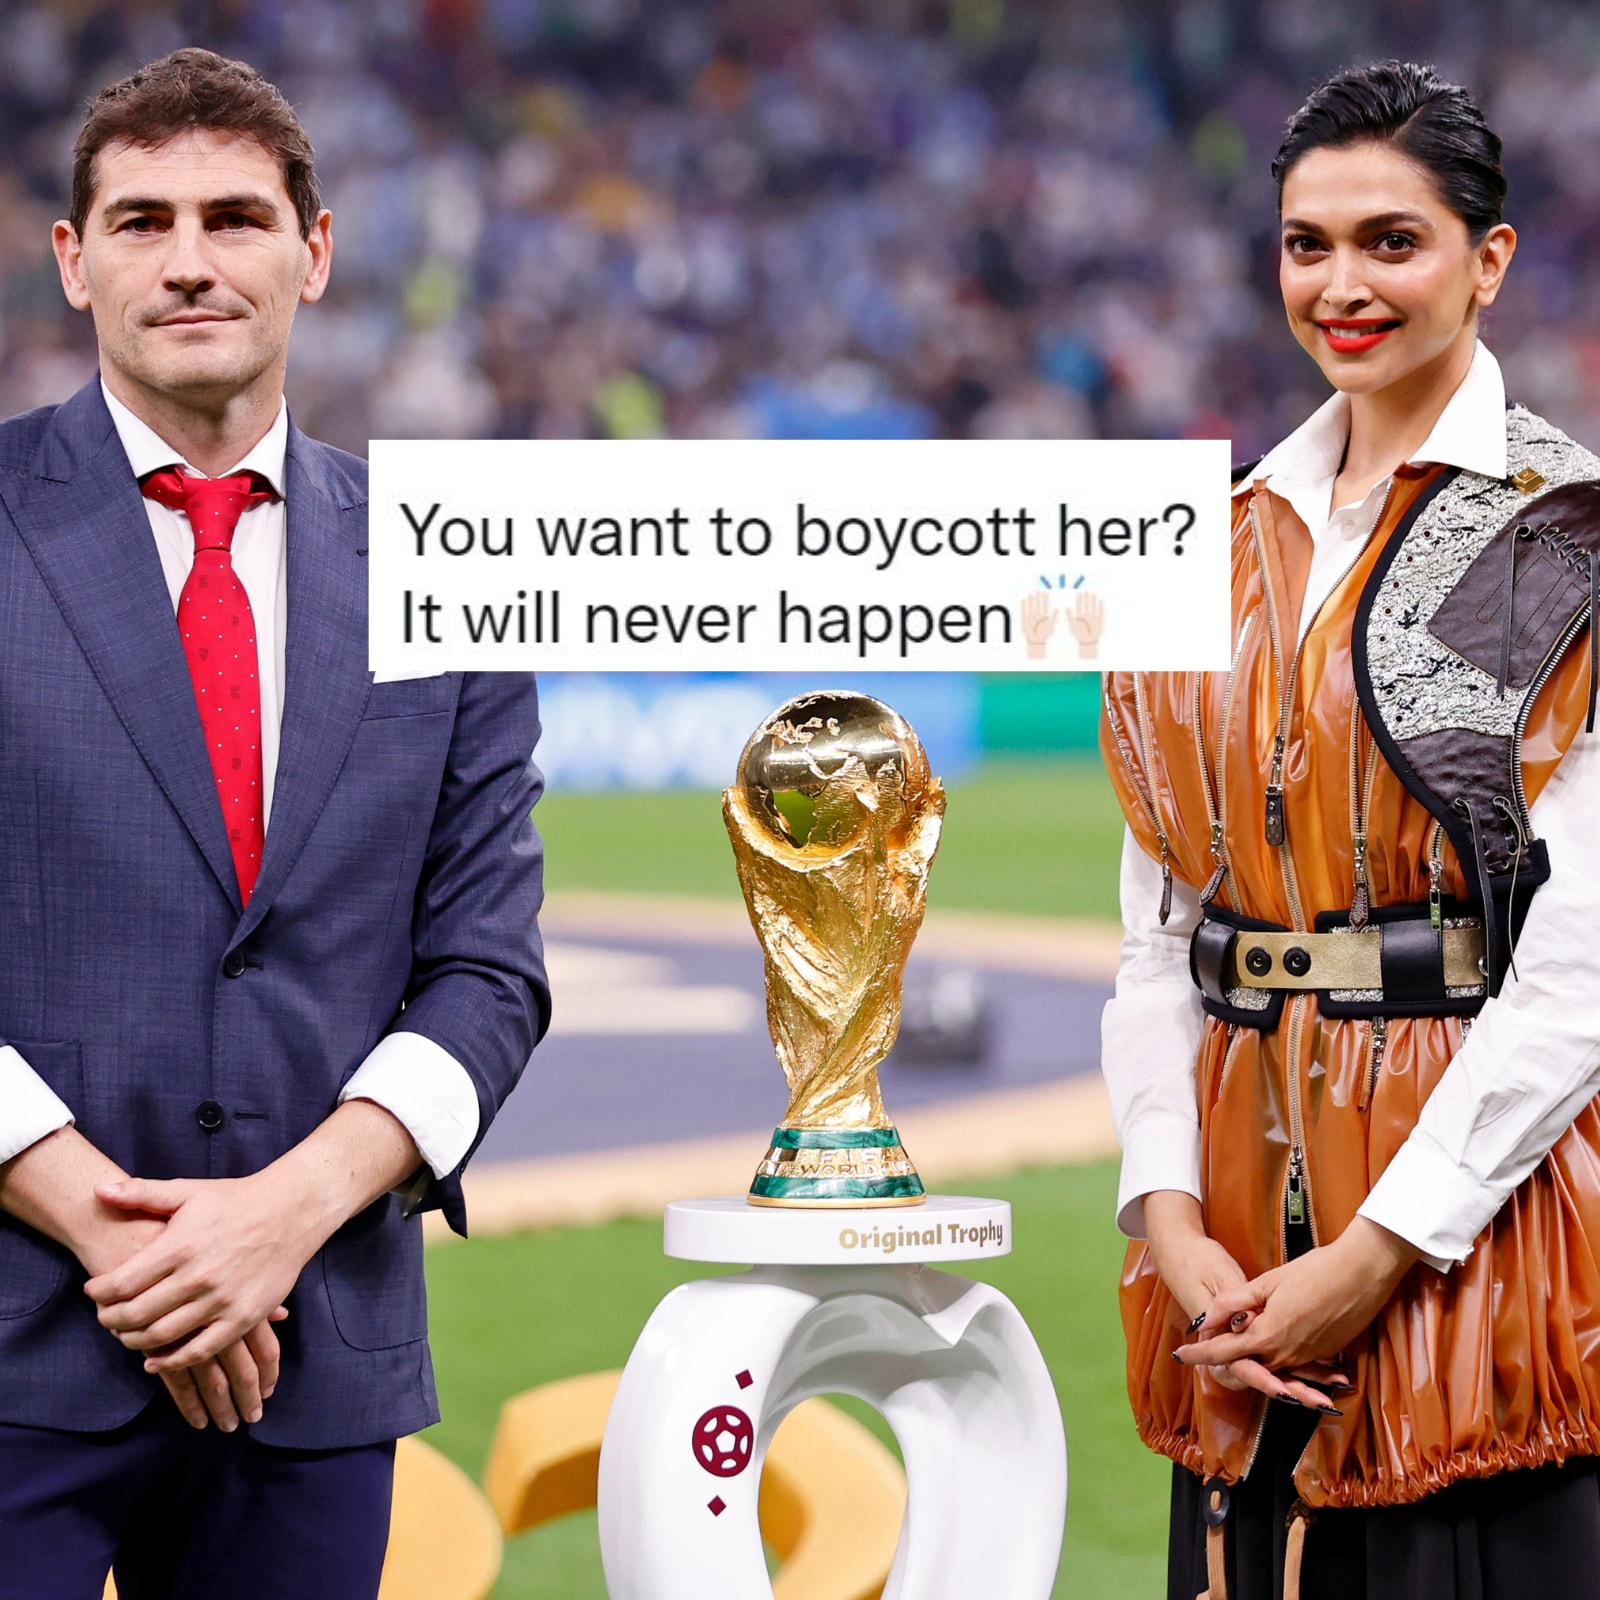 Deepika Padukone unveils FIFA World Cup 2022 trophy in Qatar, fans call it  proud moment - India Today